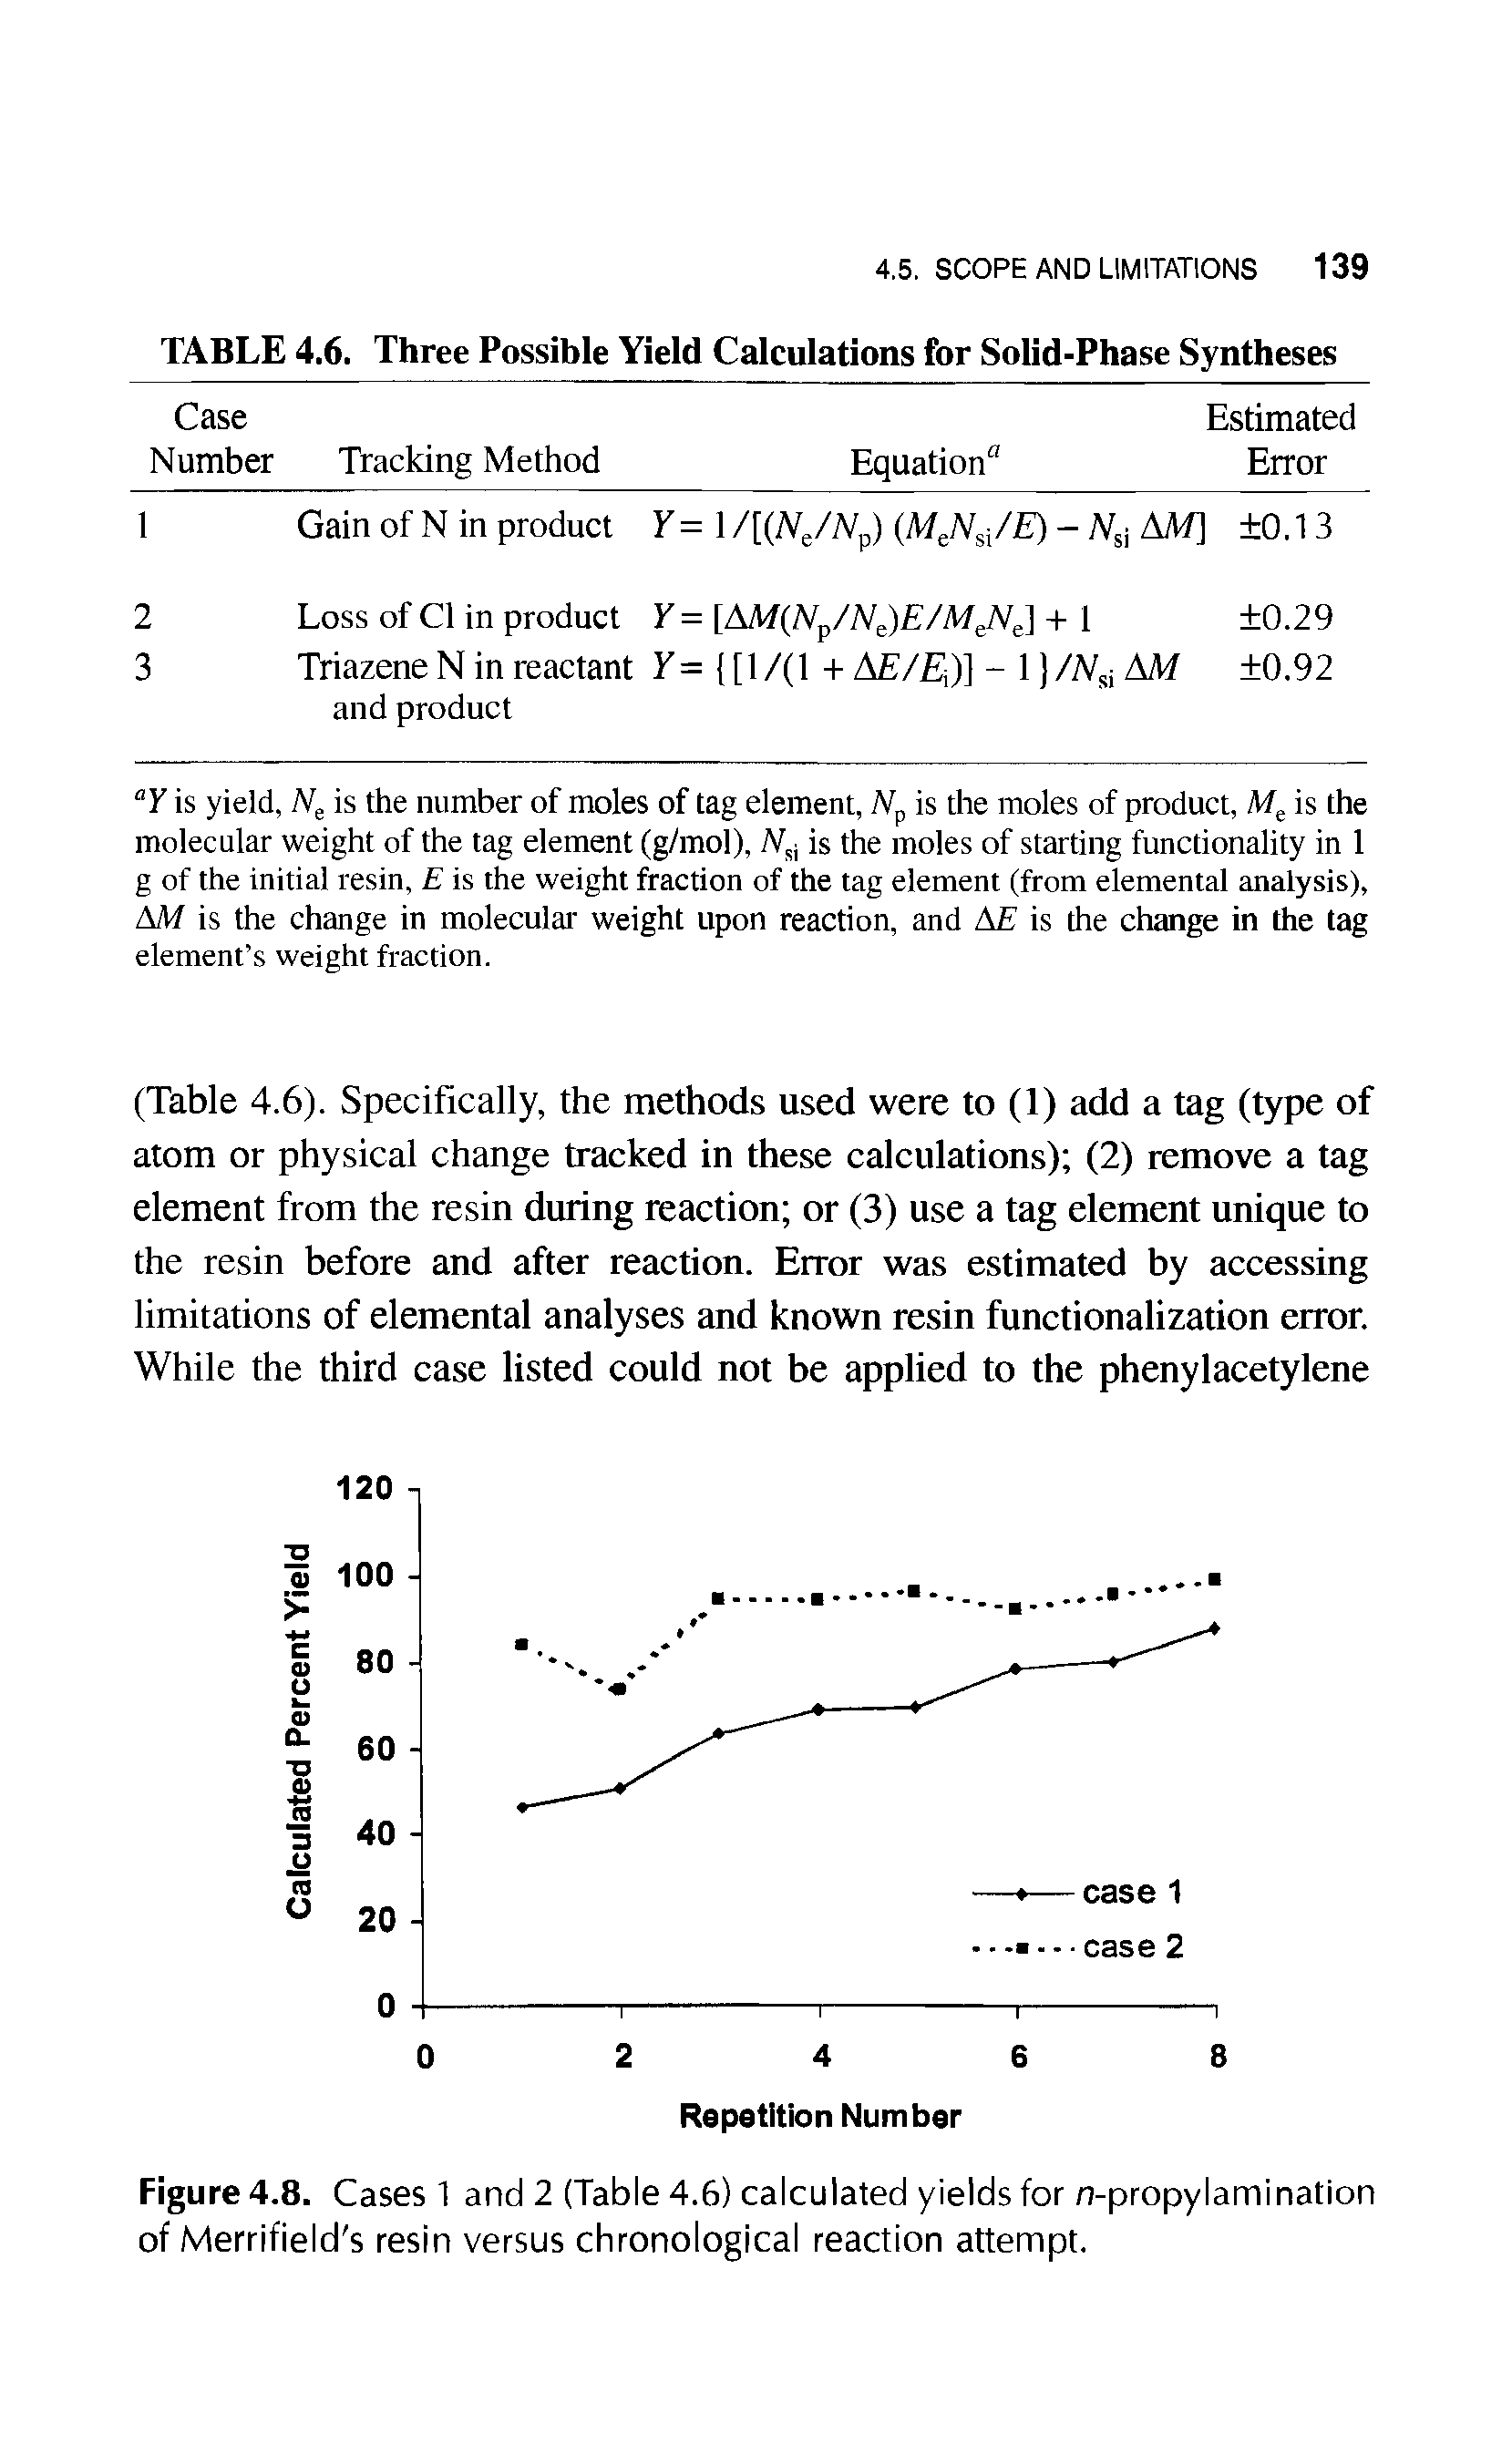 Figure 4.8. Cases 1 and 2 (Table 4.6) calculated yields for n-propylamination of Merrifield s resin versus chronological reaction attempt.